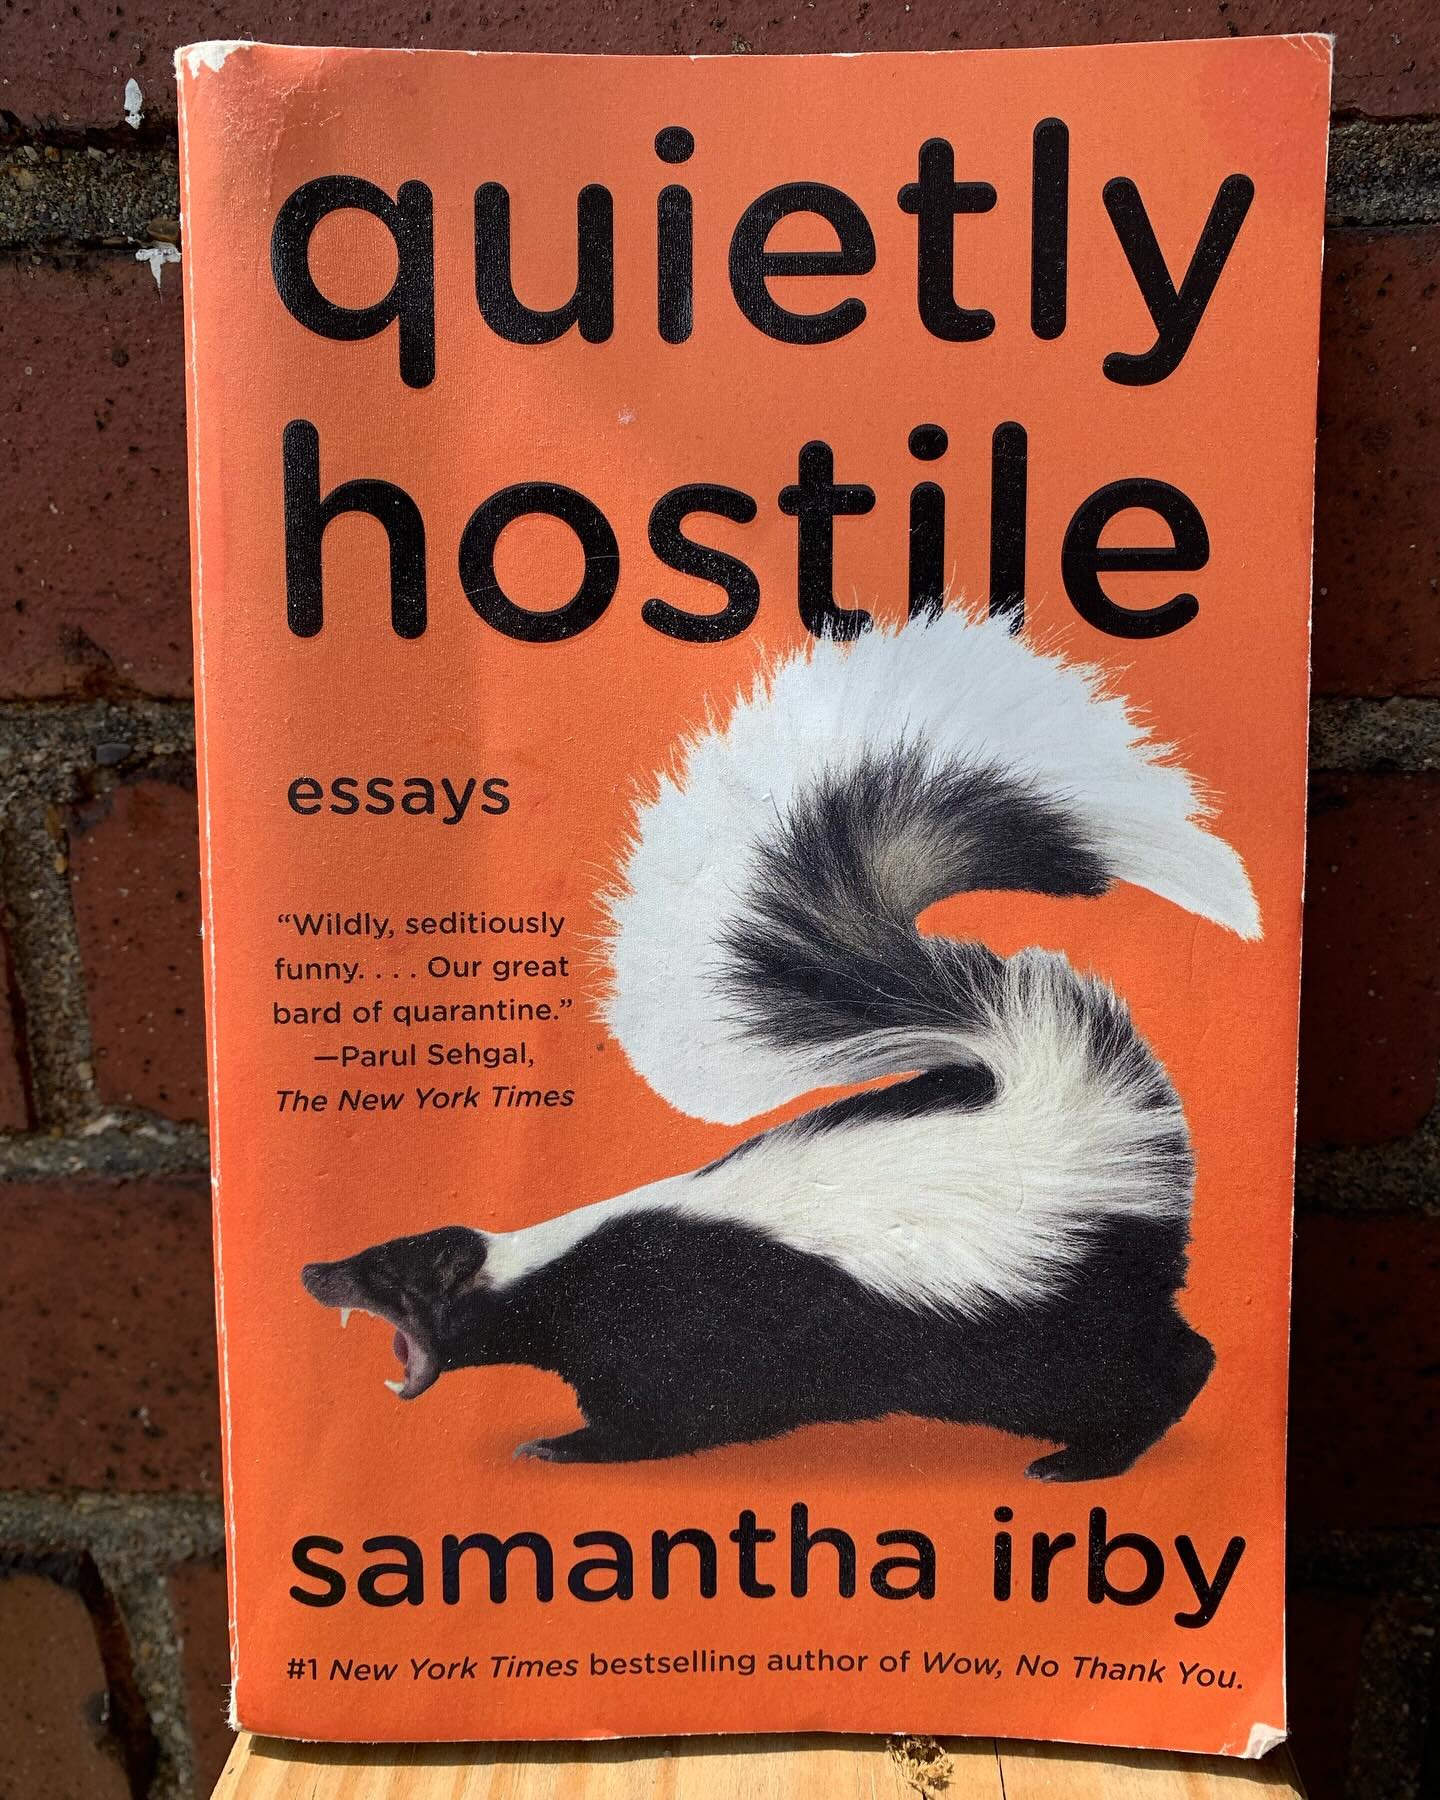 18th book got his year was hilarious. Will definitely be reading more by Samantha Irby.@

#quietly #hostile